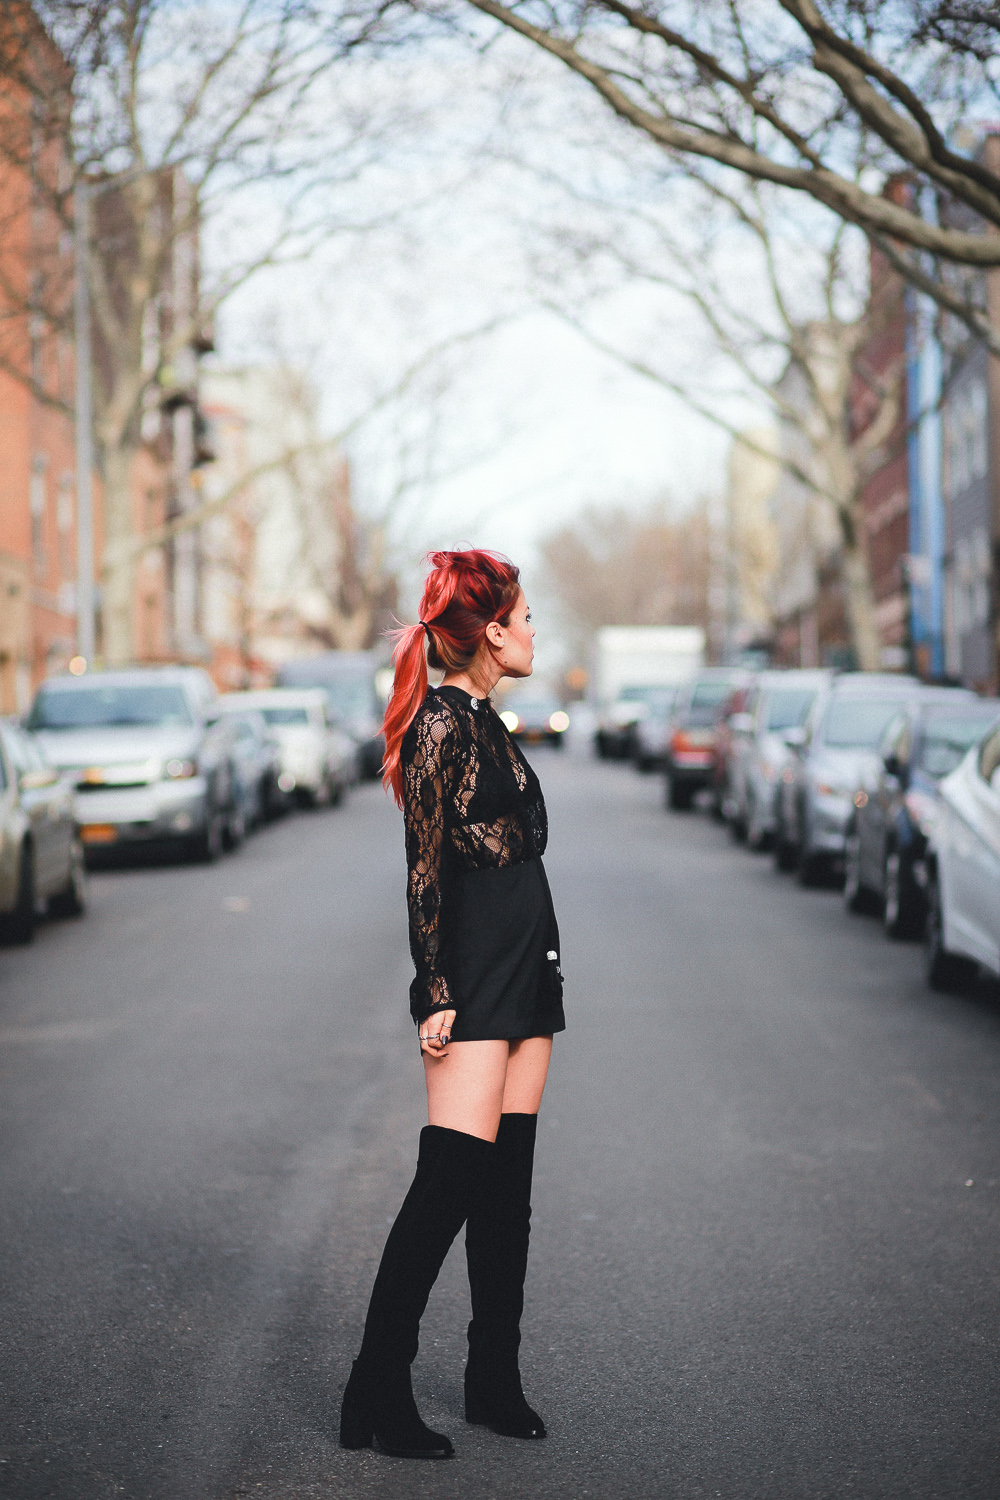 Le Happy wearing Nasty Gal black lace romper and thigh high boots